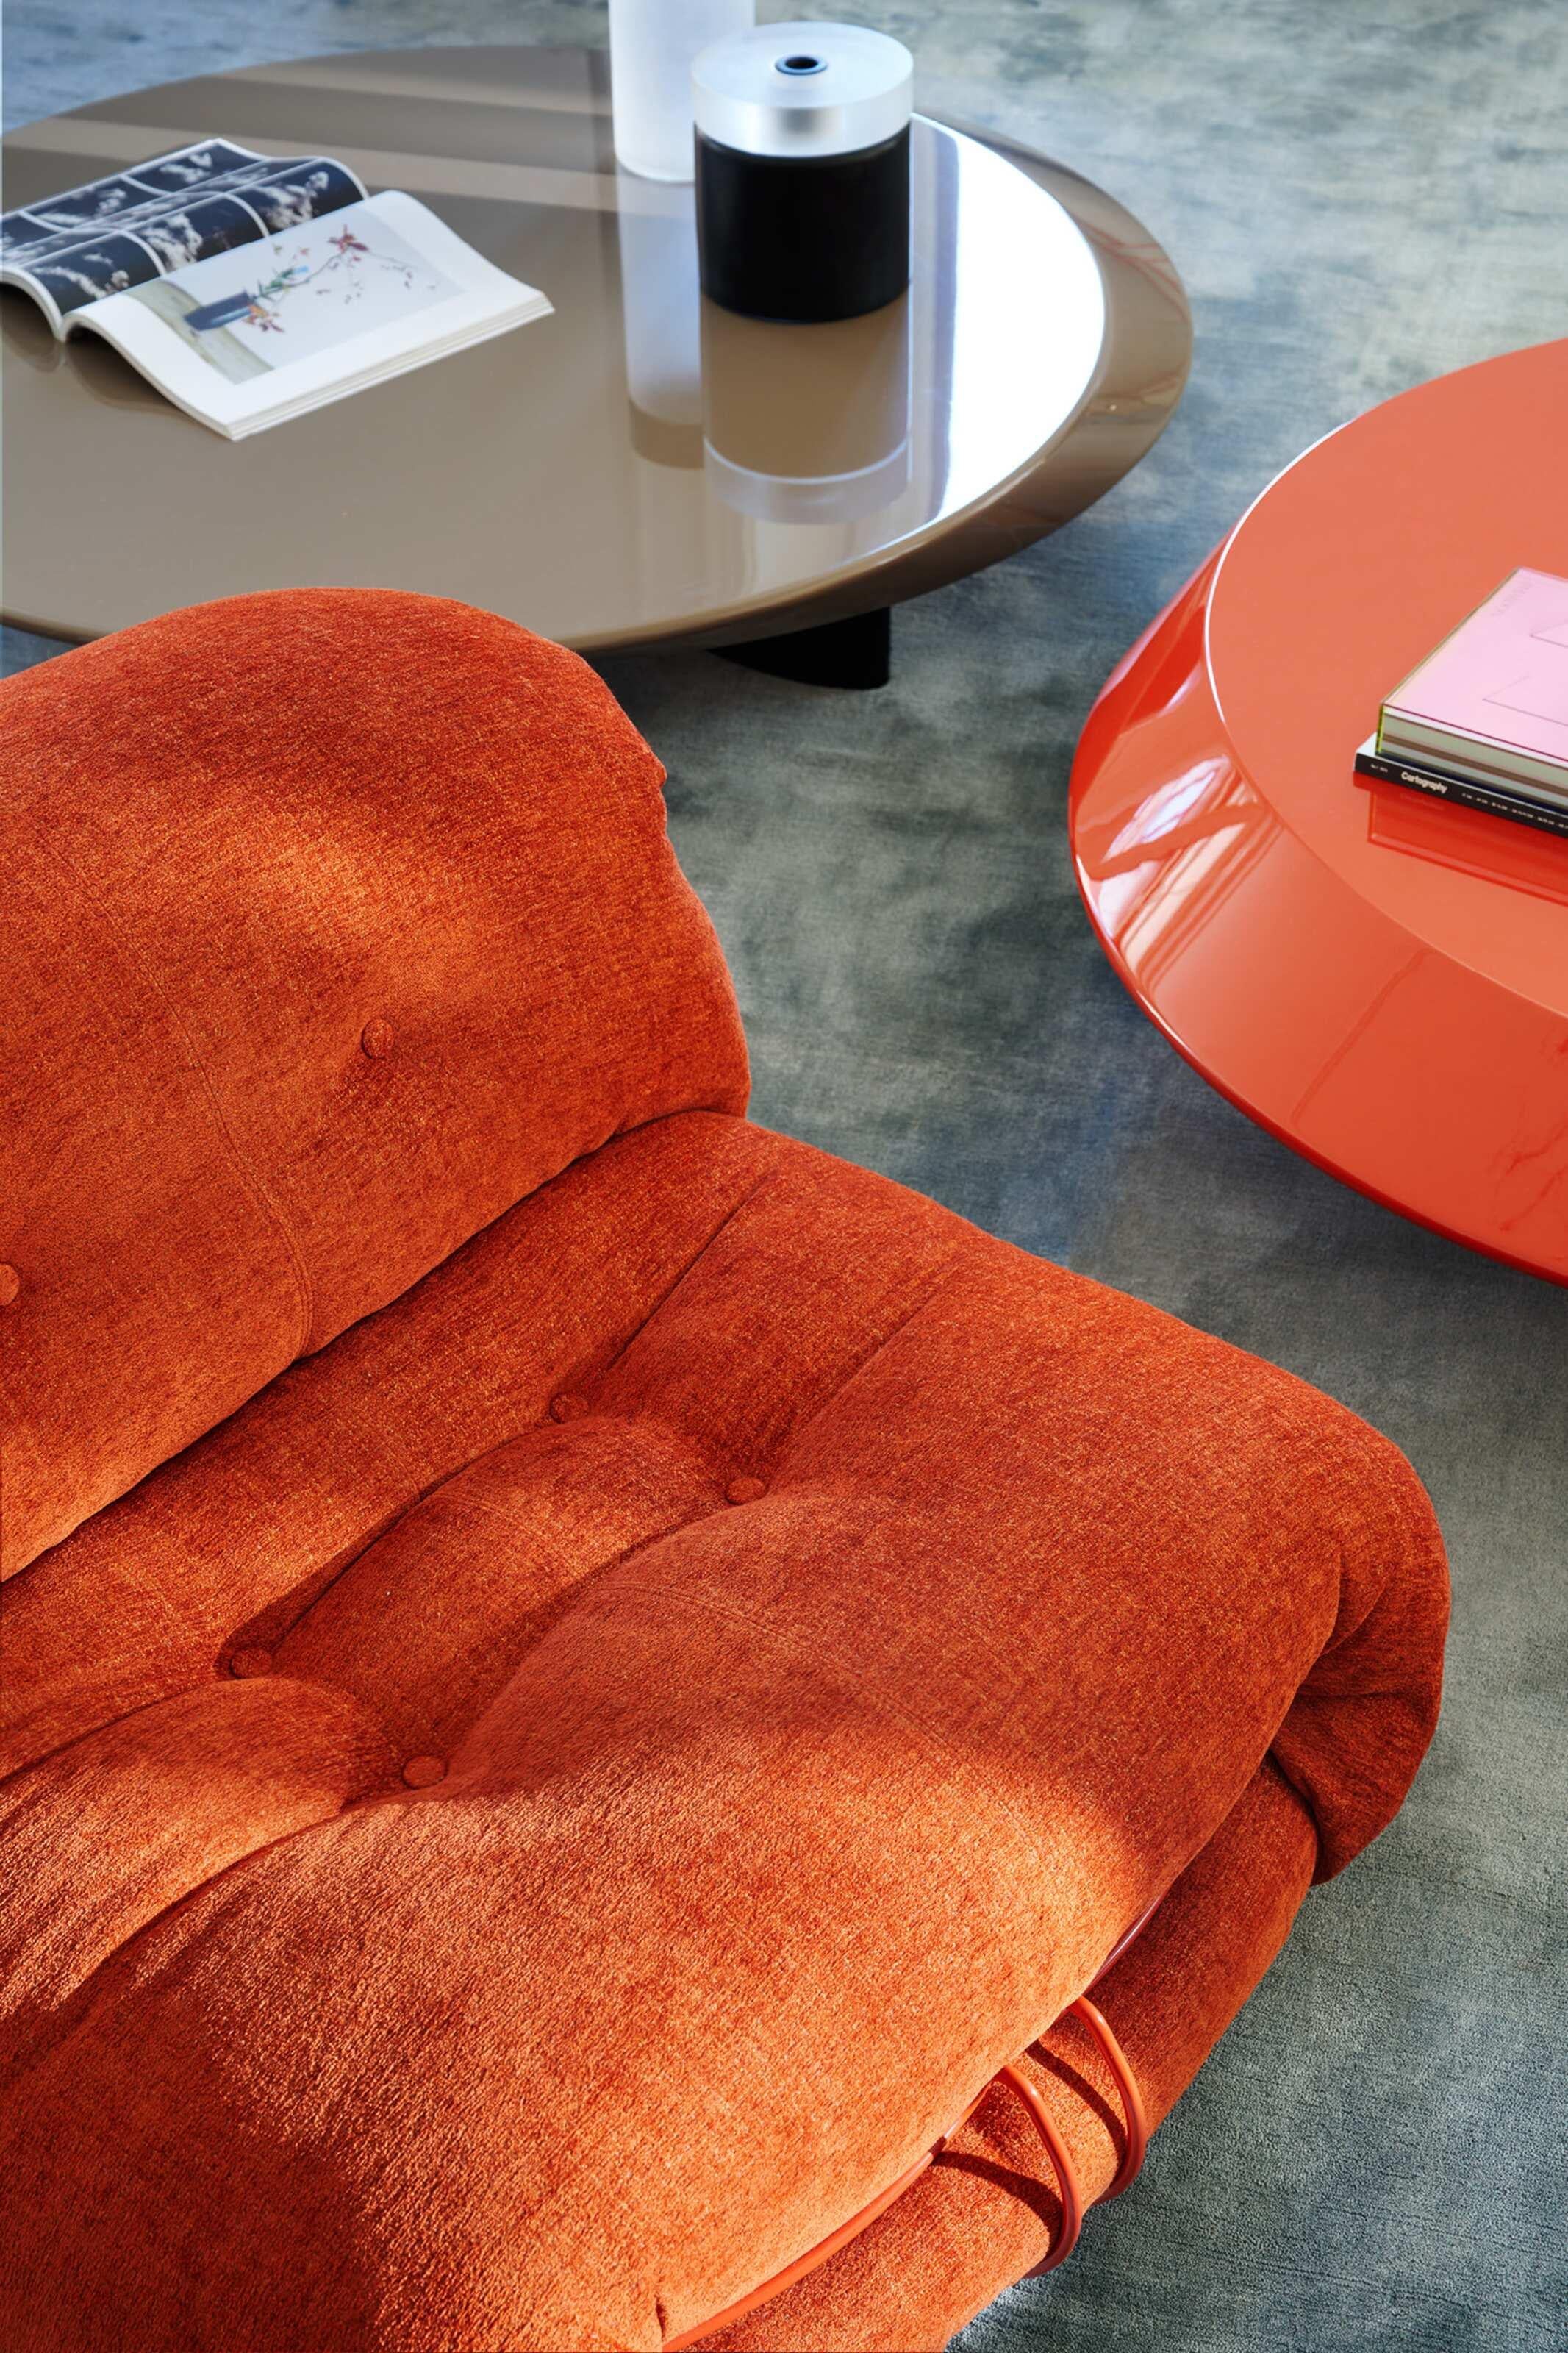 Soriana armchair by Afra & Tobia Scarpa for Cassina.
Manufactured in Italy.

The idea of comfort itself becomes a sofa. Soriana came into being in 1969, thanks to an intuitive vision by Afra and Tobia Scarpa that was destined to re-write the history